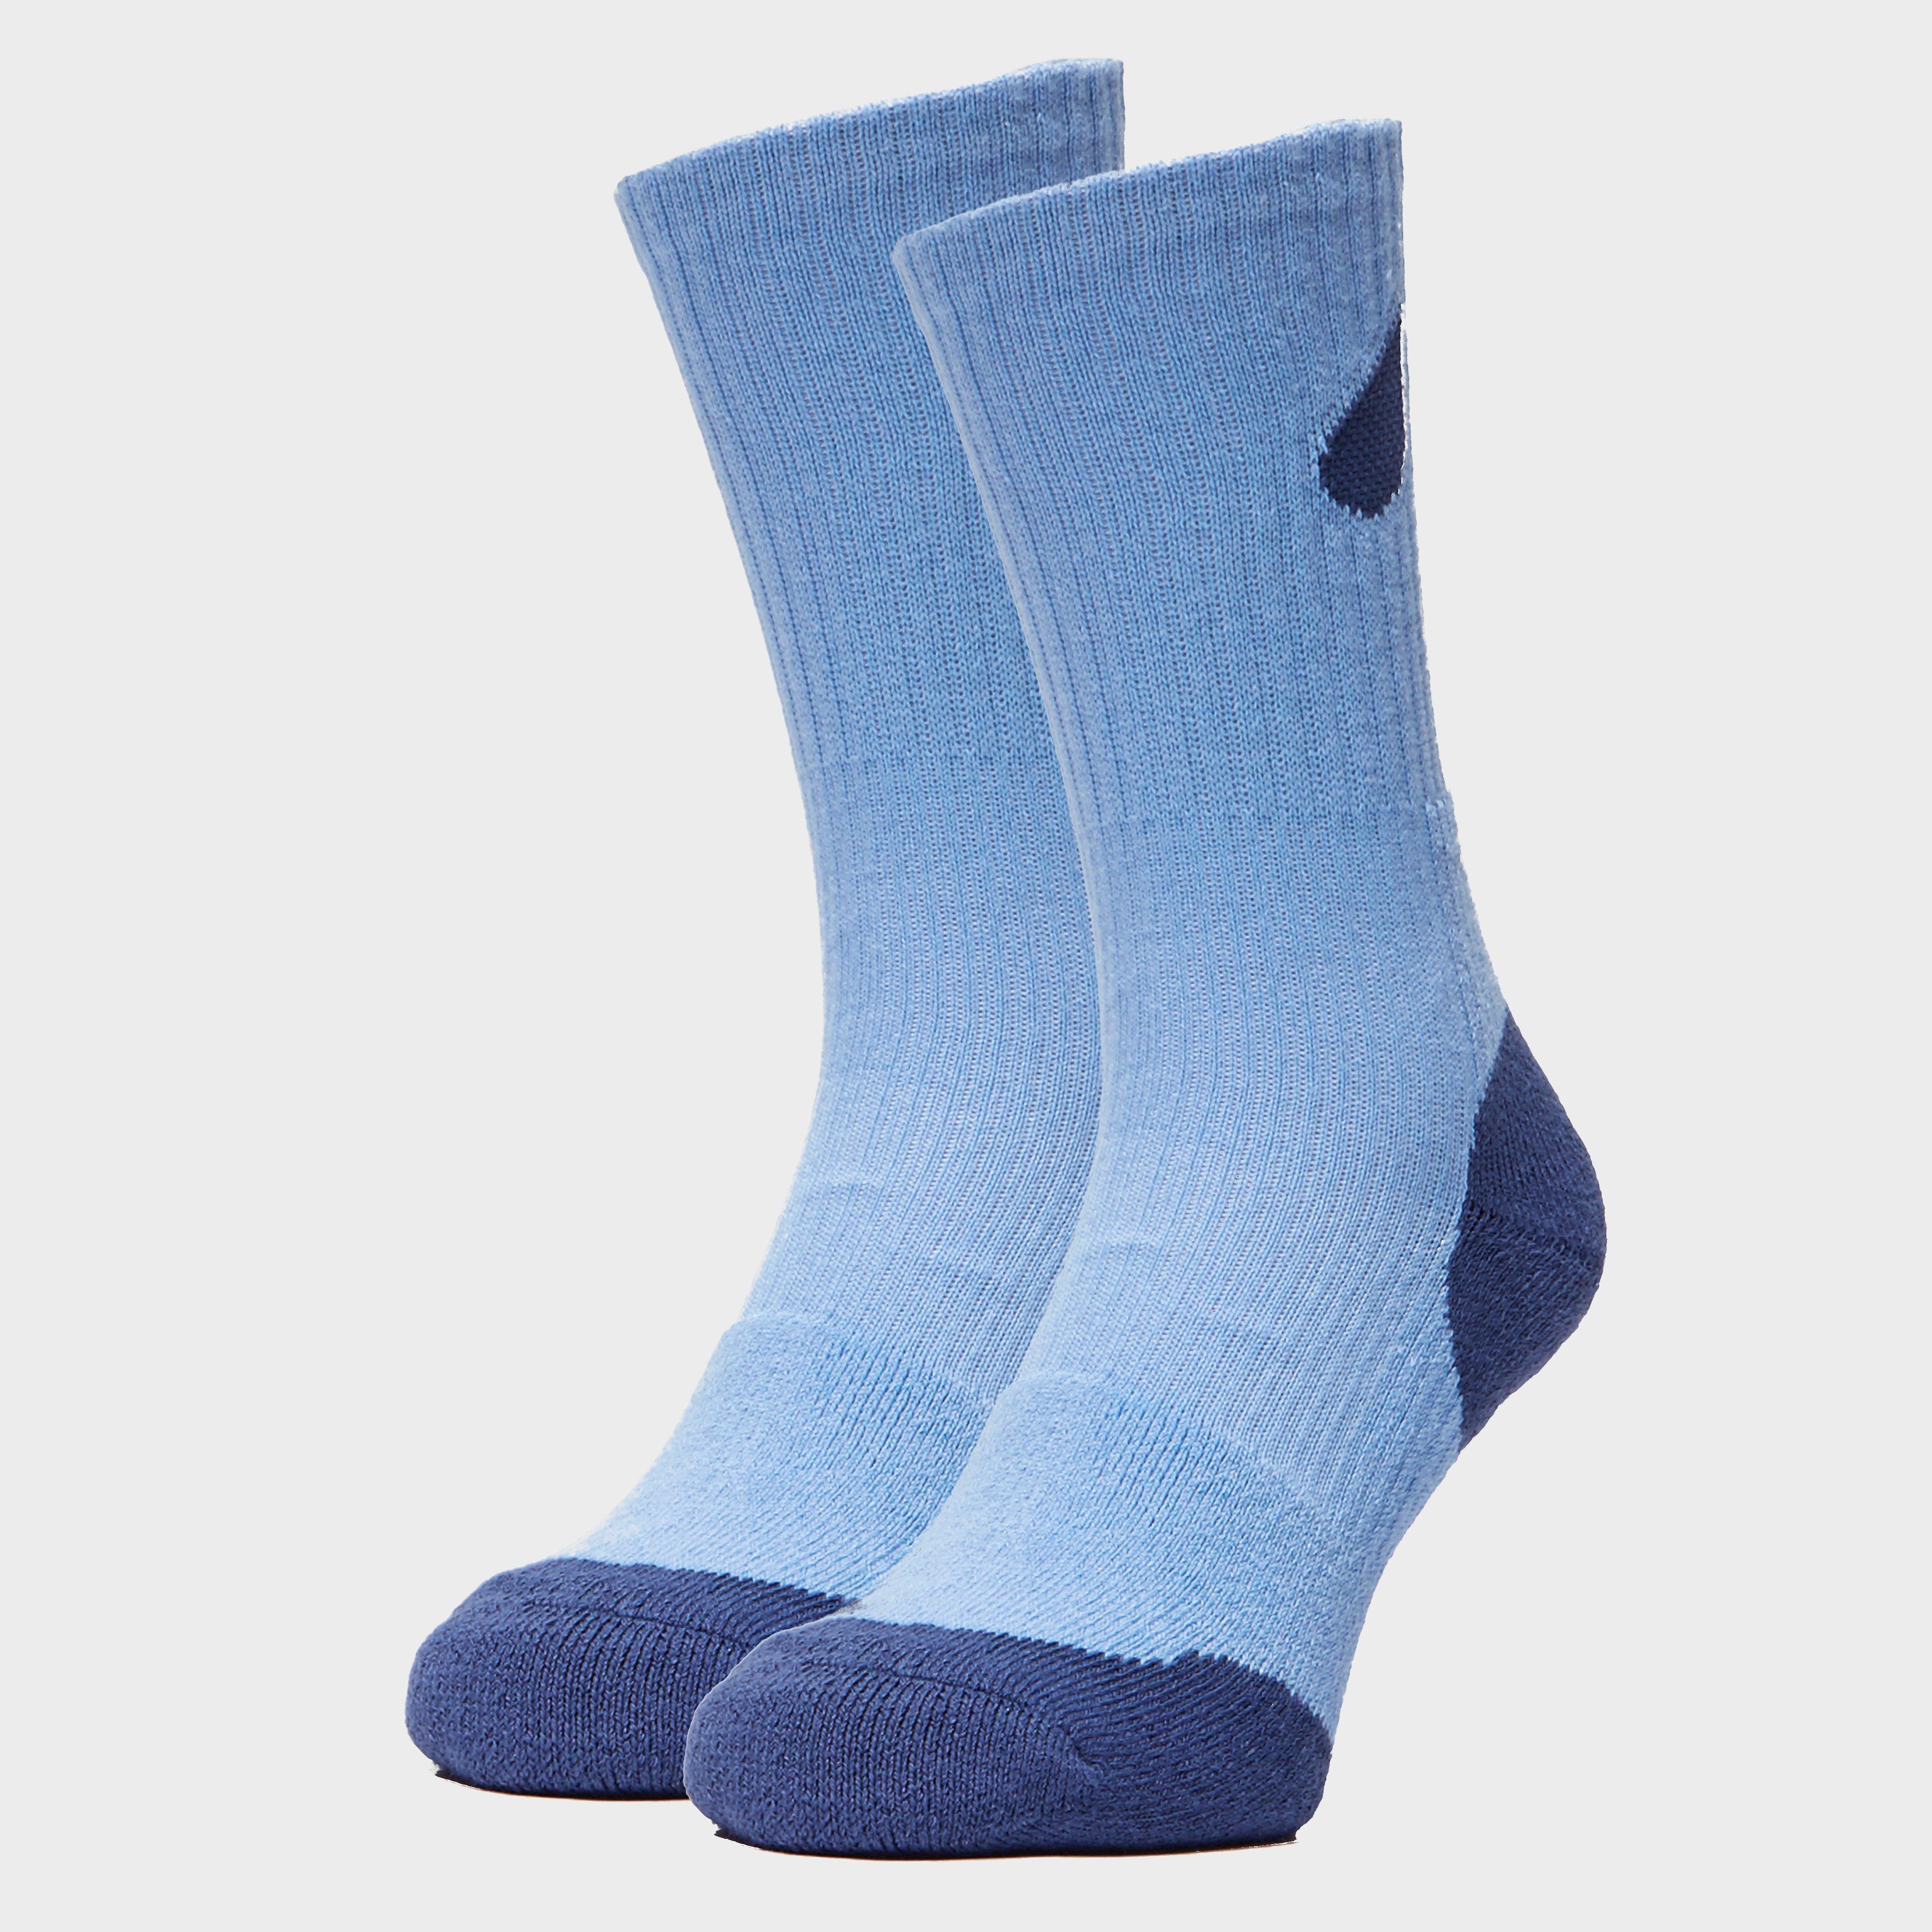 Peter Storm Women's Double Layer Socks - 2 Pack, Blue